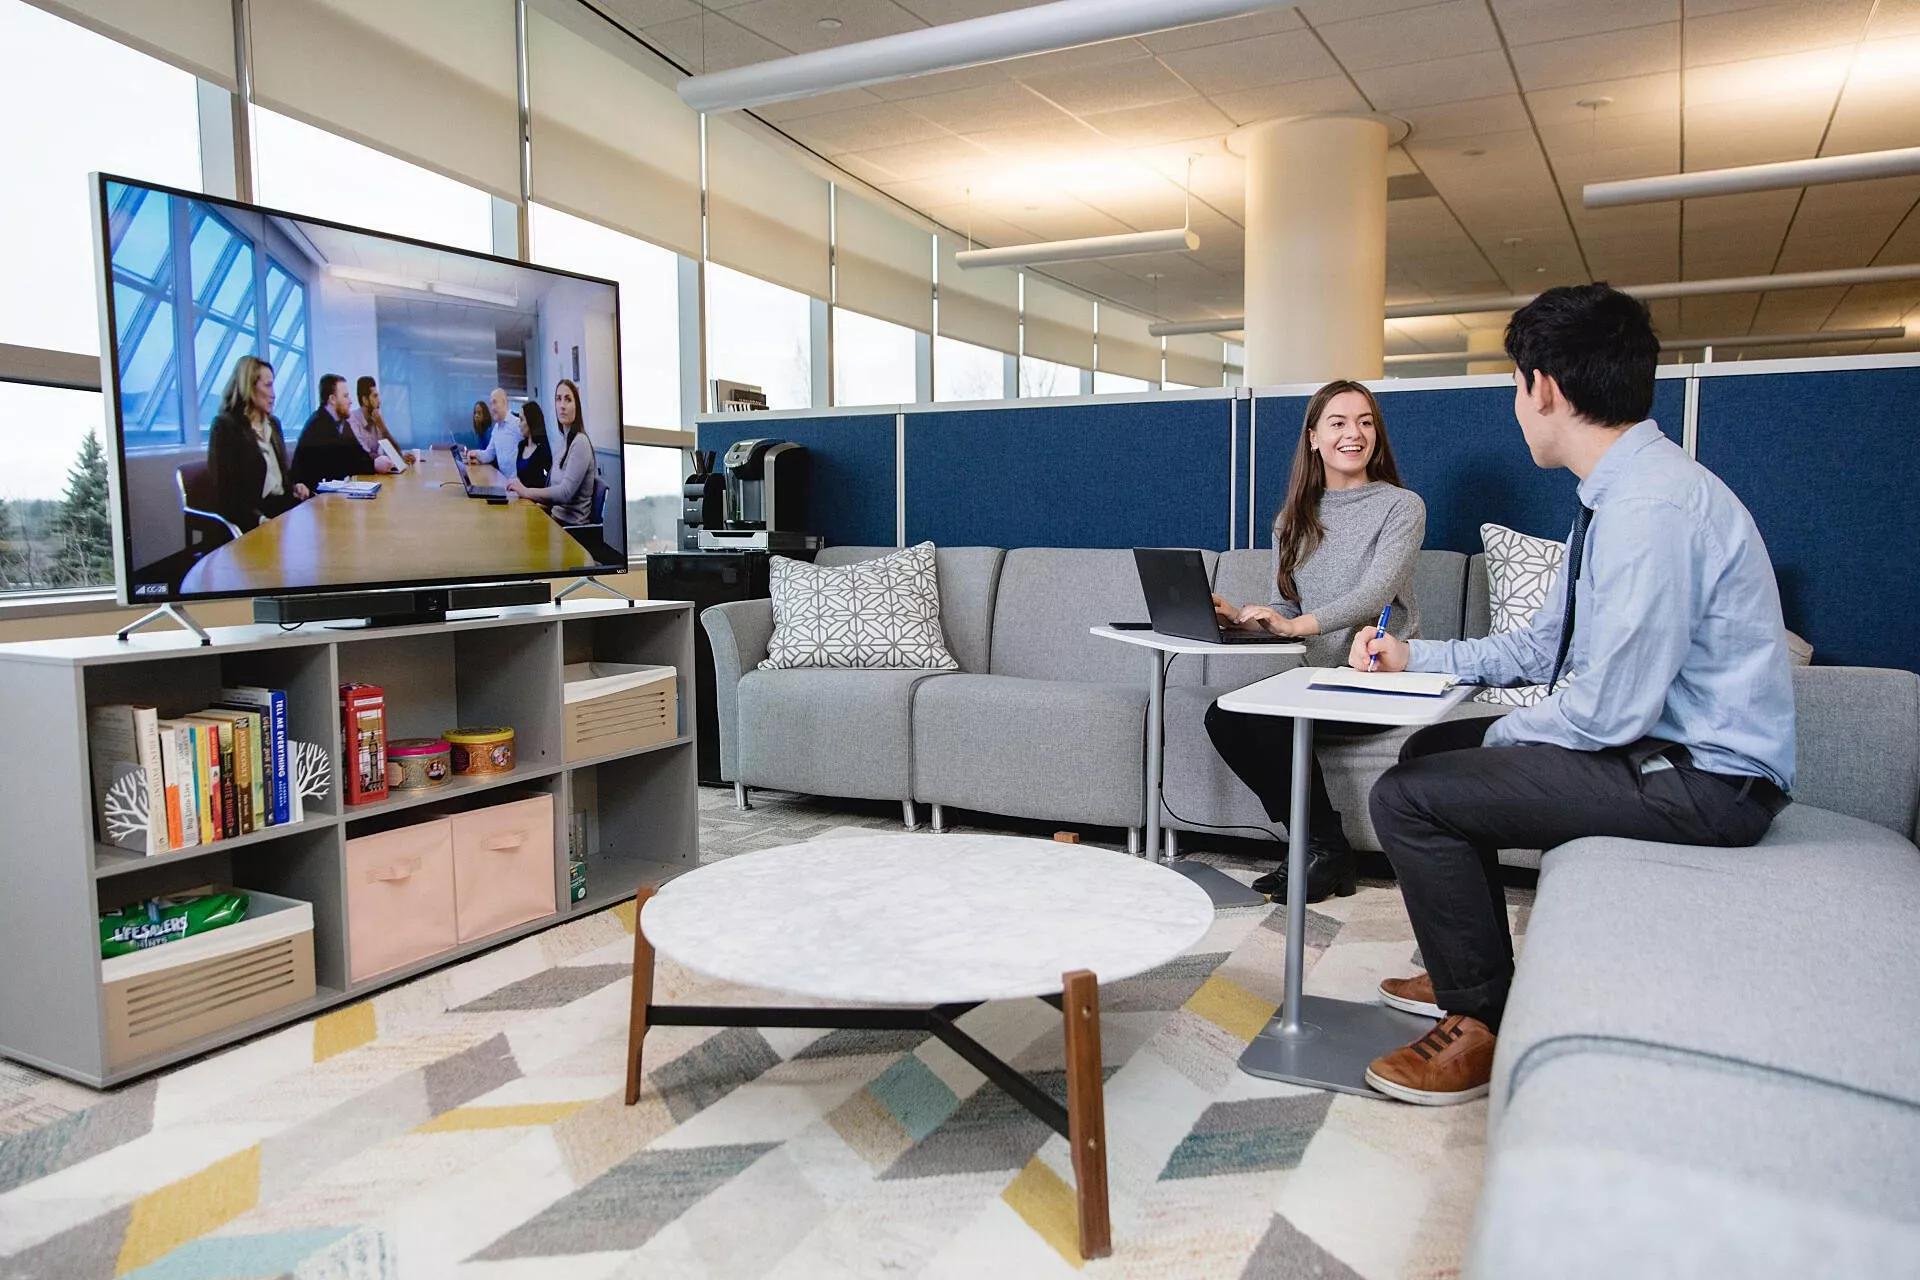 Two employees sitting in an open space office connect with a team through videoconferencing